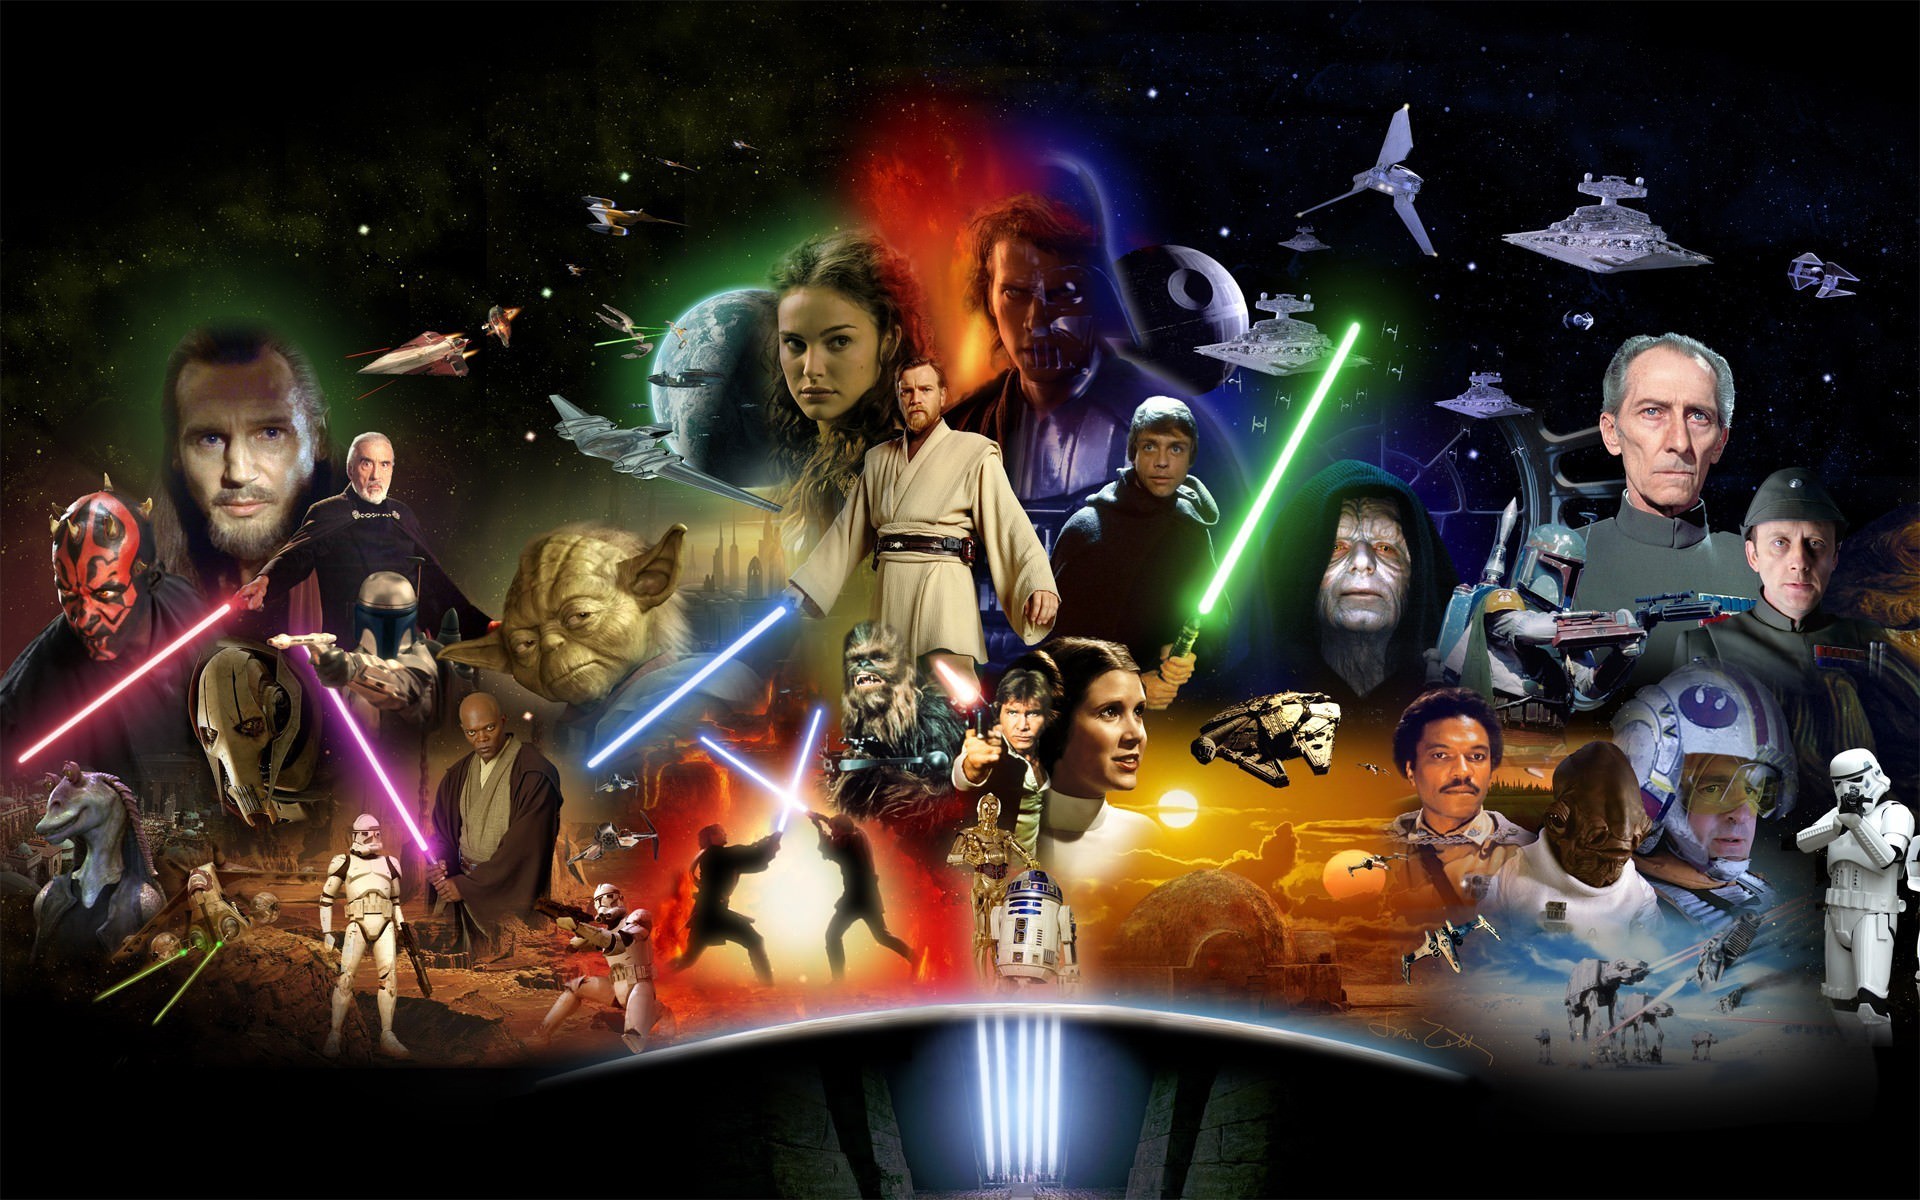 5 Star Wars Questions That Remained Unanswered